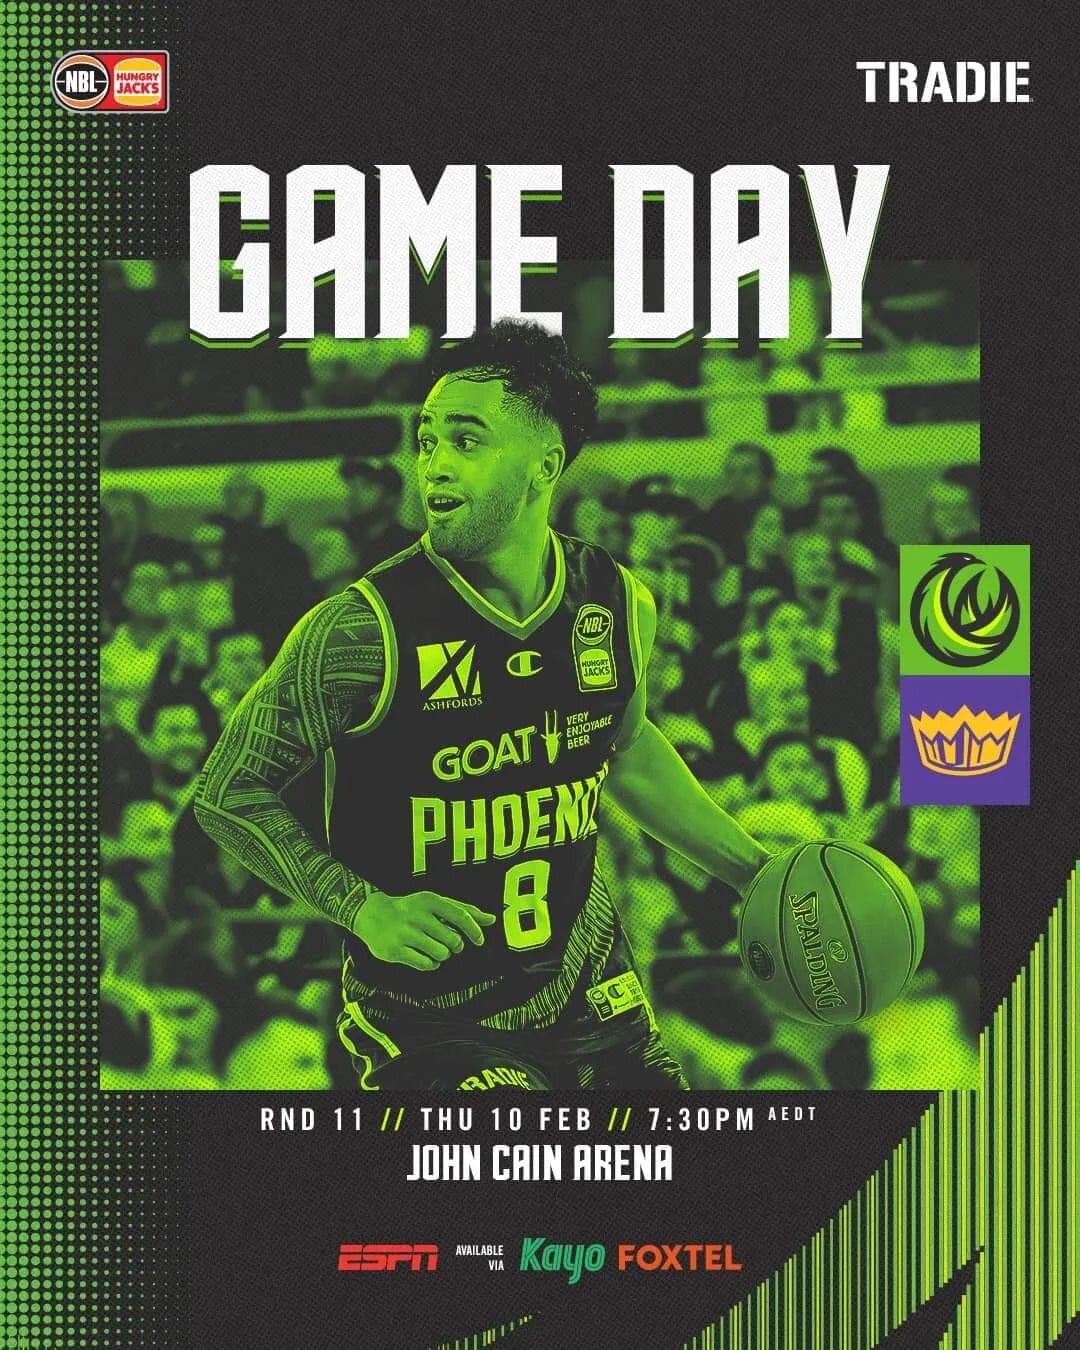 We are back bringing the noise tonight for @semelbphoenix @nbl game at @johncainarena - catch us around the arena!
Let's get the win!
.
.
.
@cmsaus
#basketball #nbl #Melbourne #Australia #instamusic #instagood #livemusic #entertainment #heartland #me